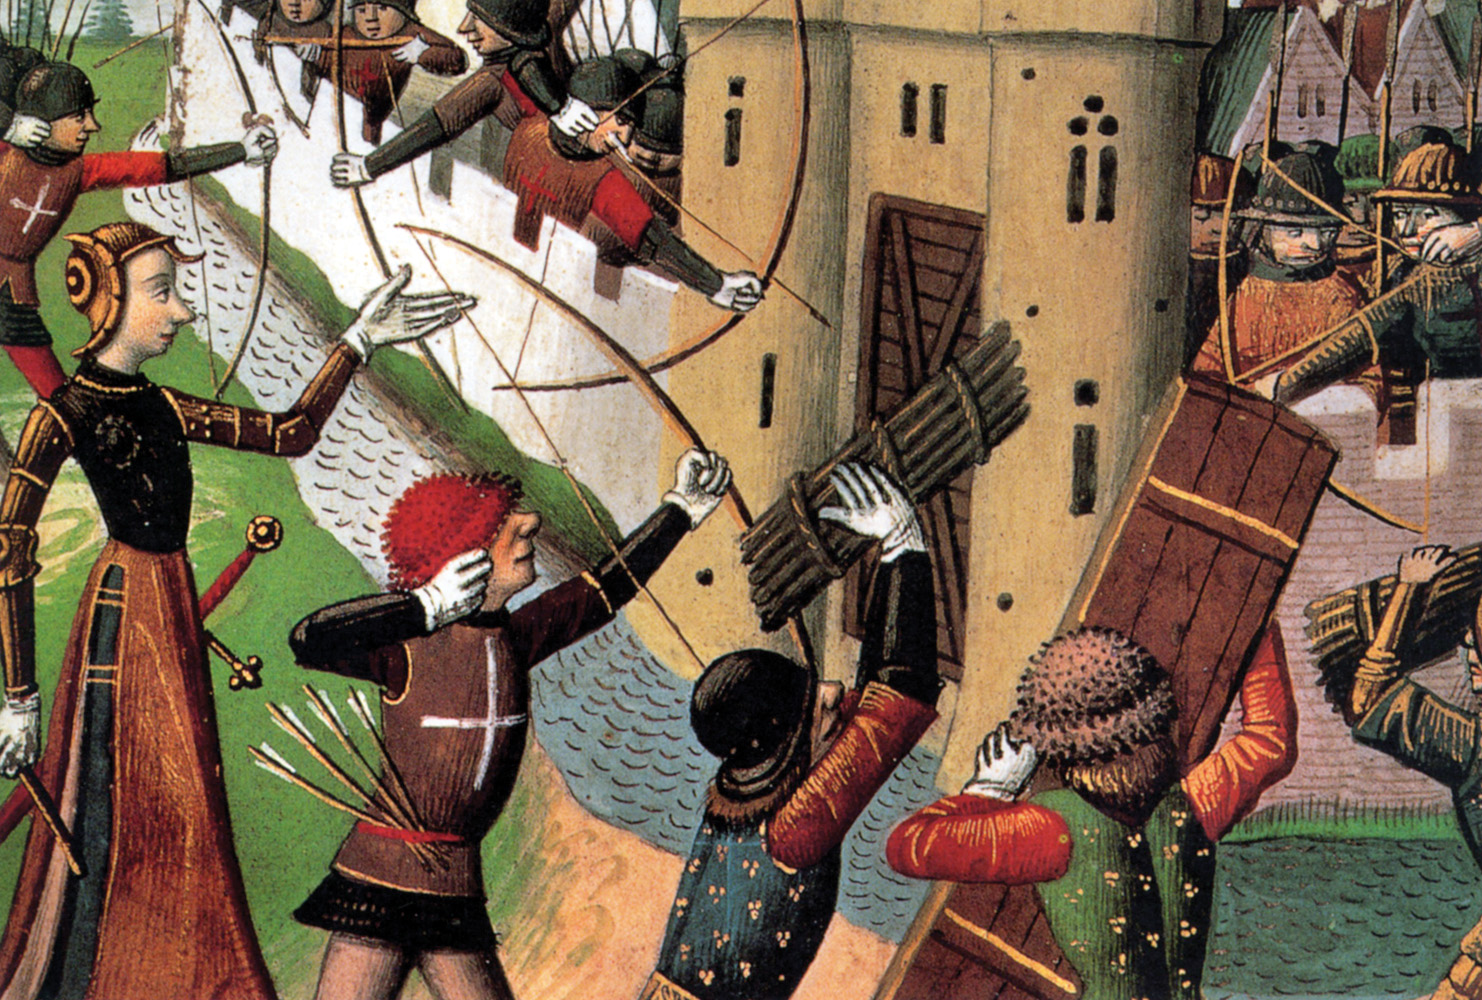 After clearing the Loire Valley of English forces, Joan participated in the unsuccessful attempt to take Paris from an Anglo-Burgundian army in September 1429. 